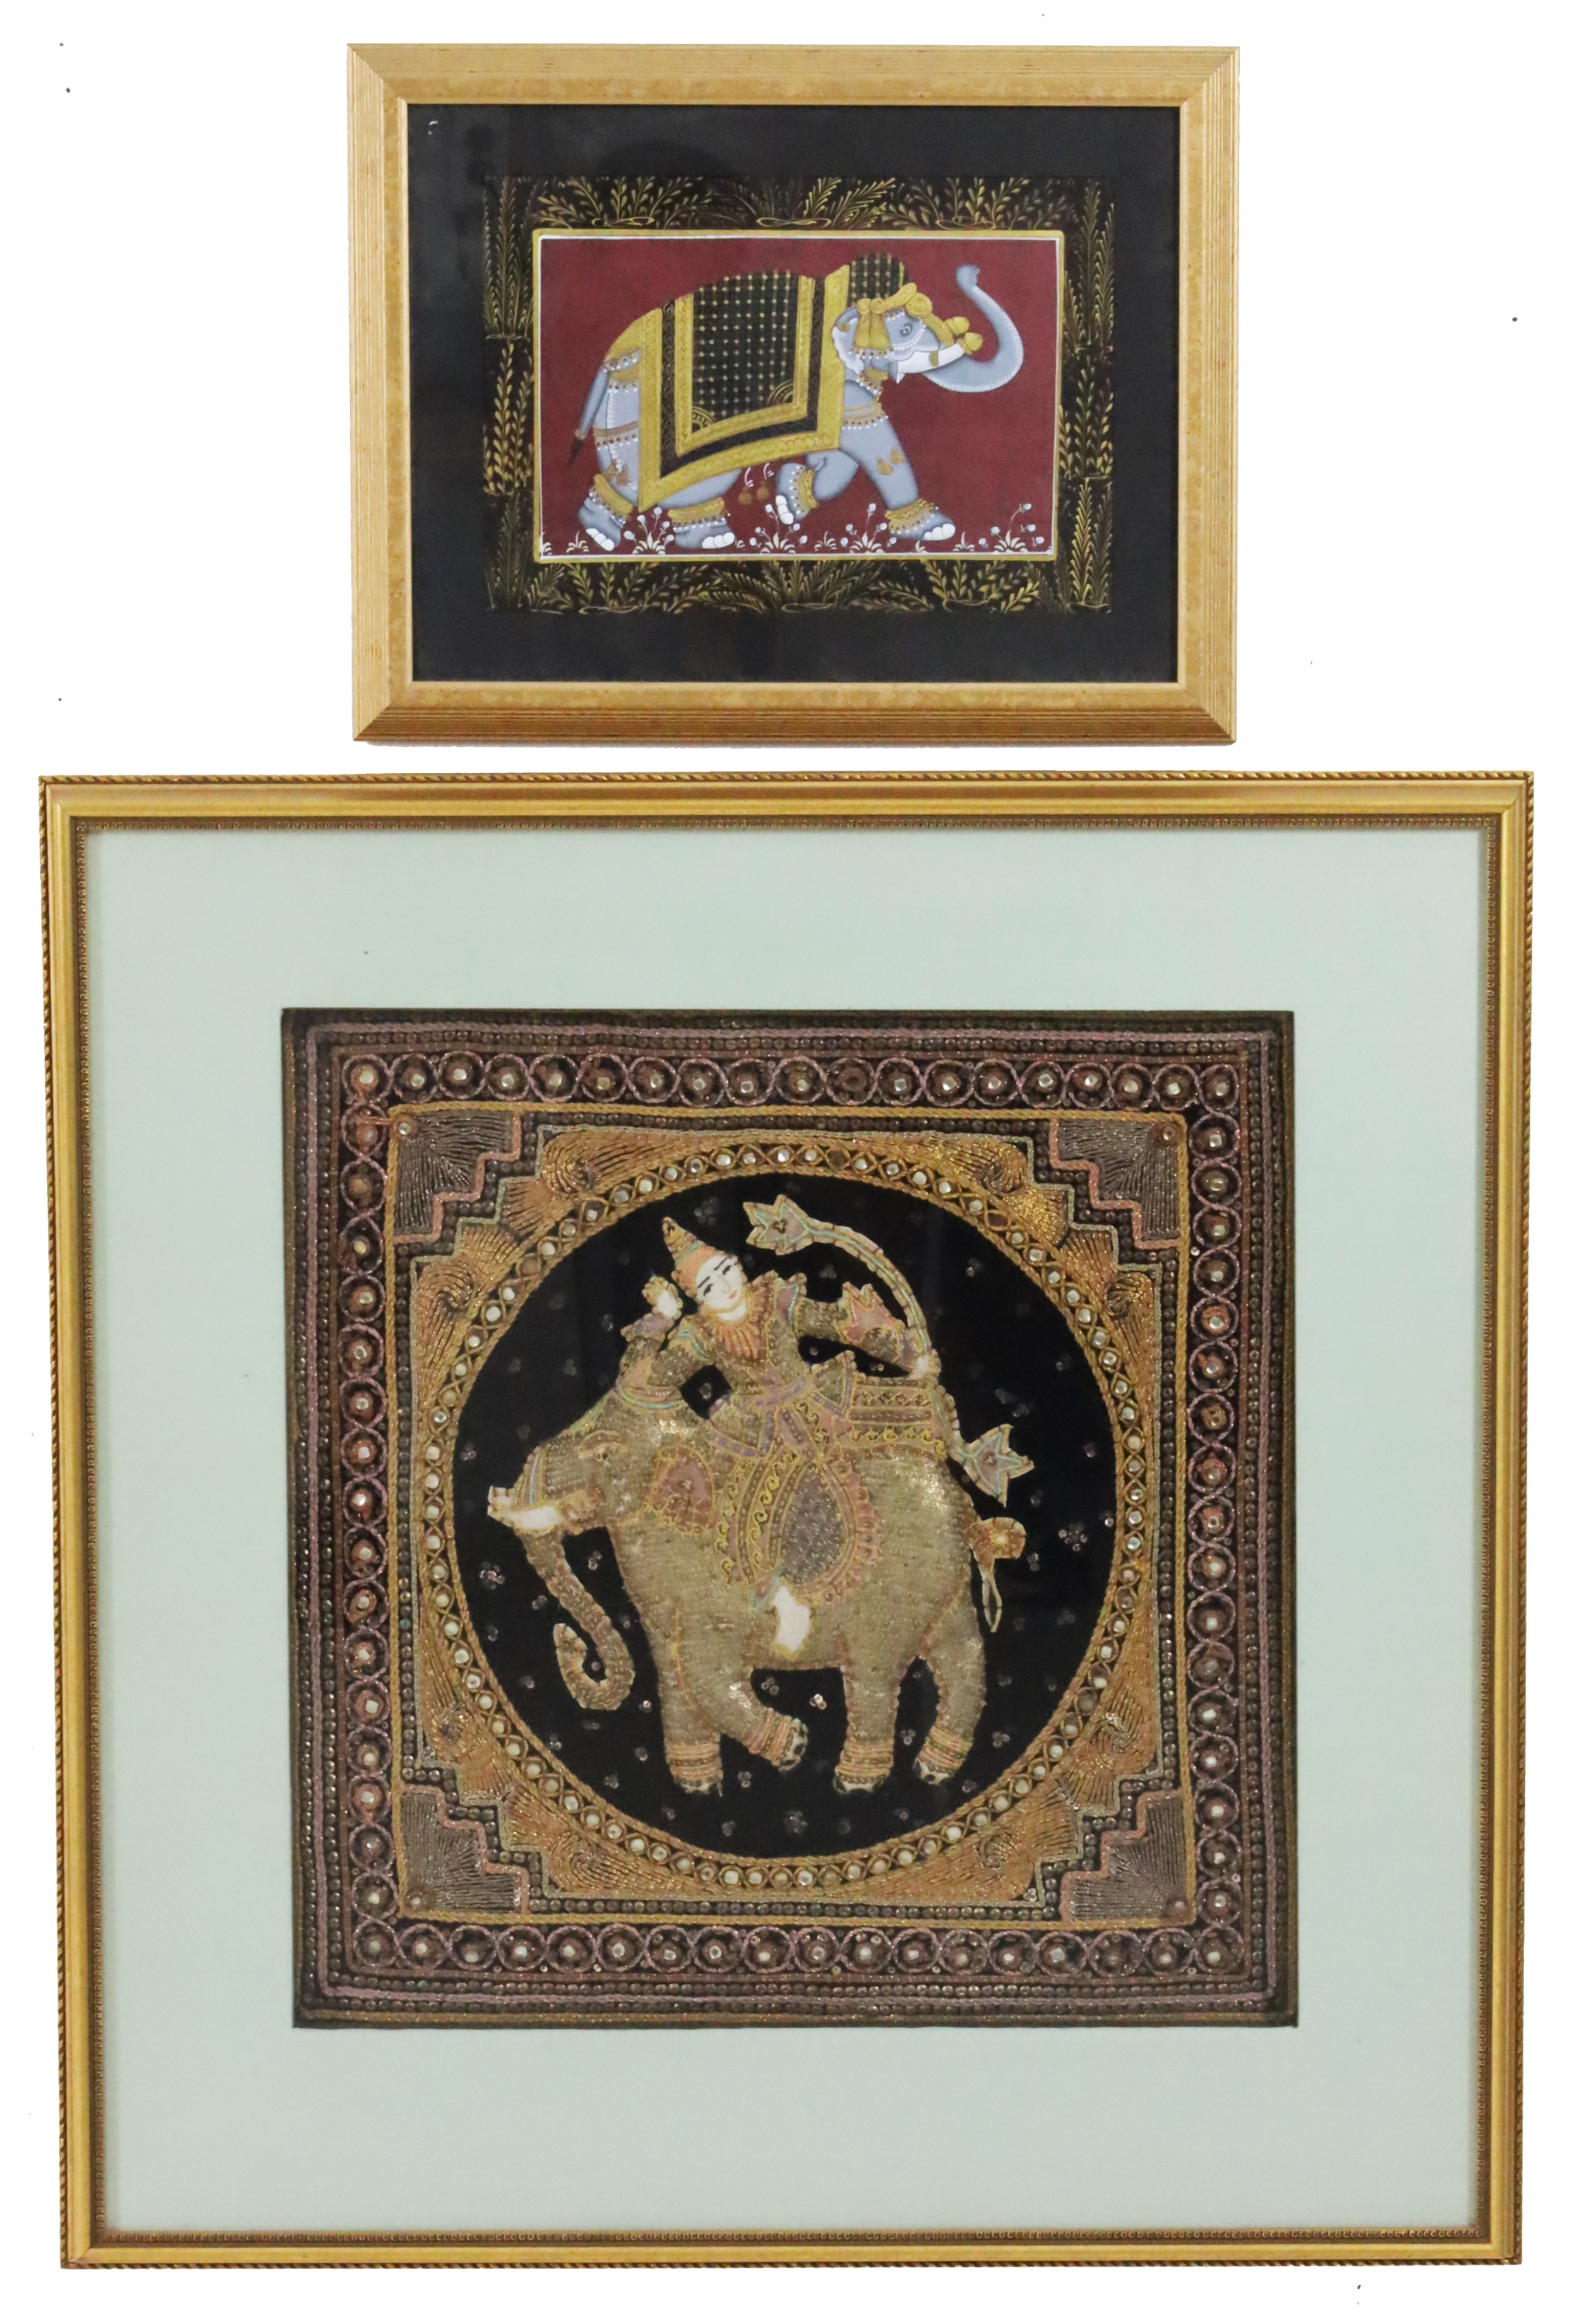 2 PCS OF INDO-CHINESE ARTWORK Two